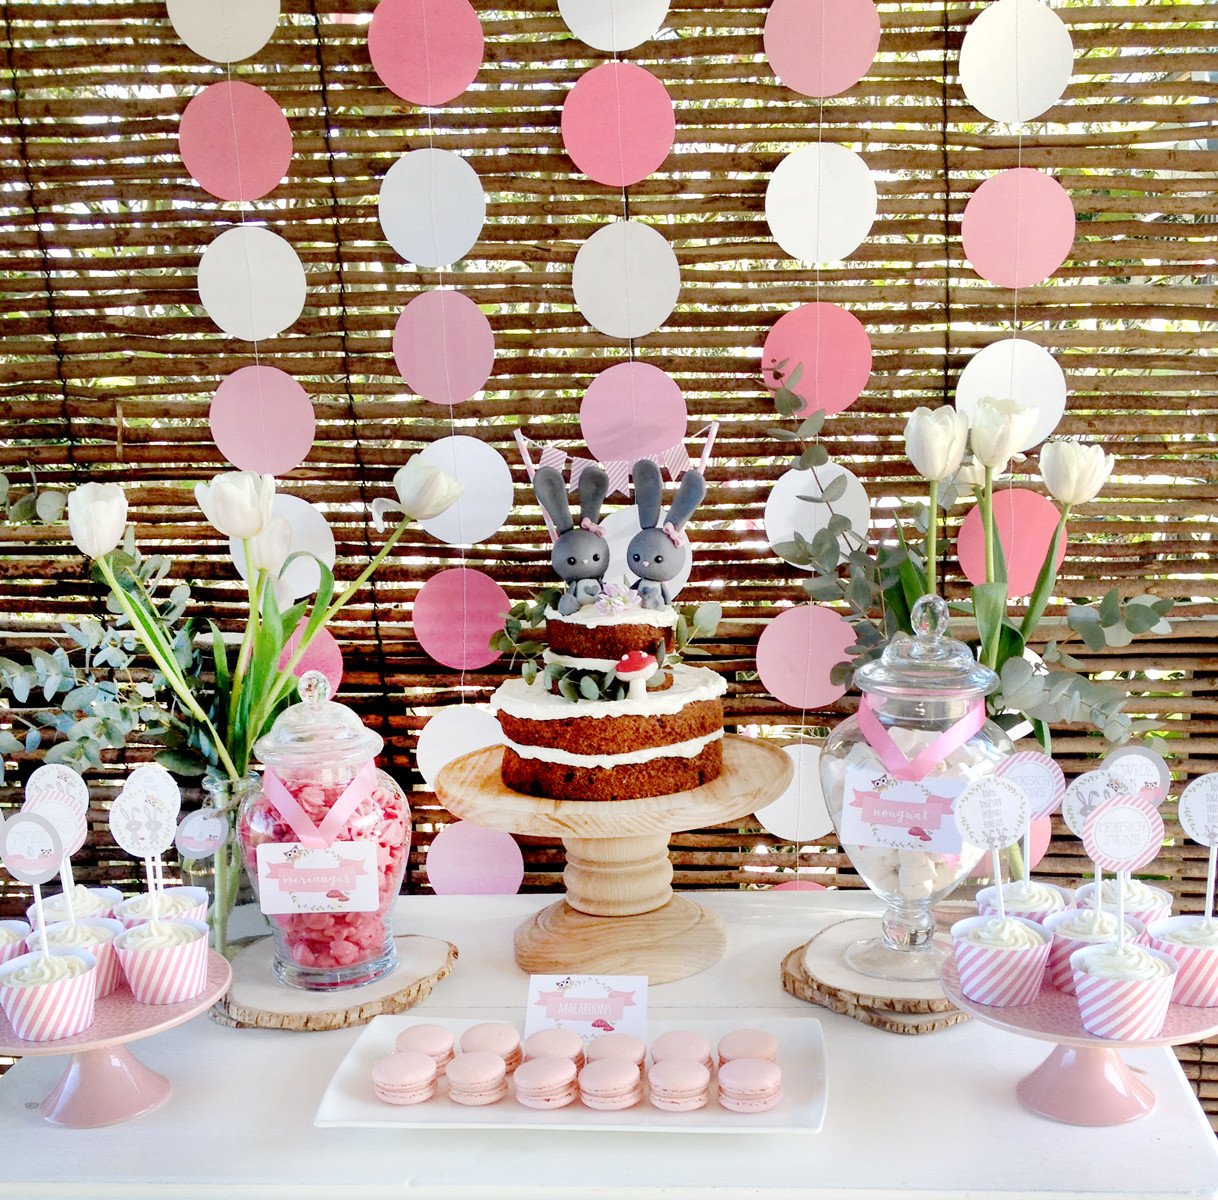 Gorgeous Baby Shower Ideas for twin girls baby shower, in stylish pink and gray